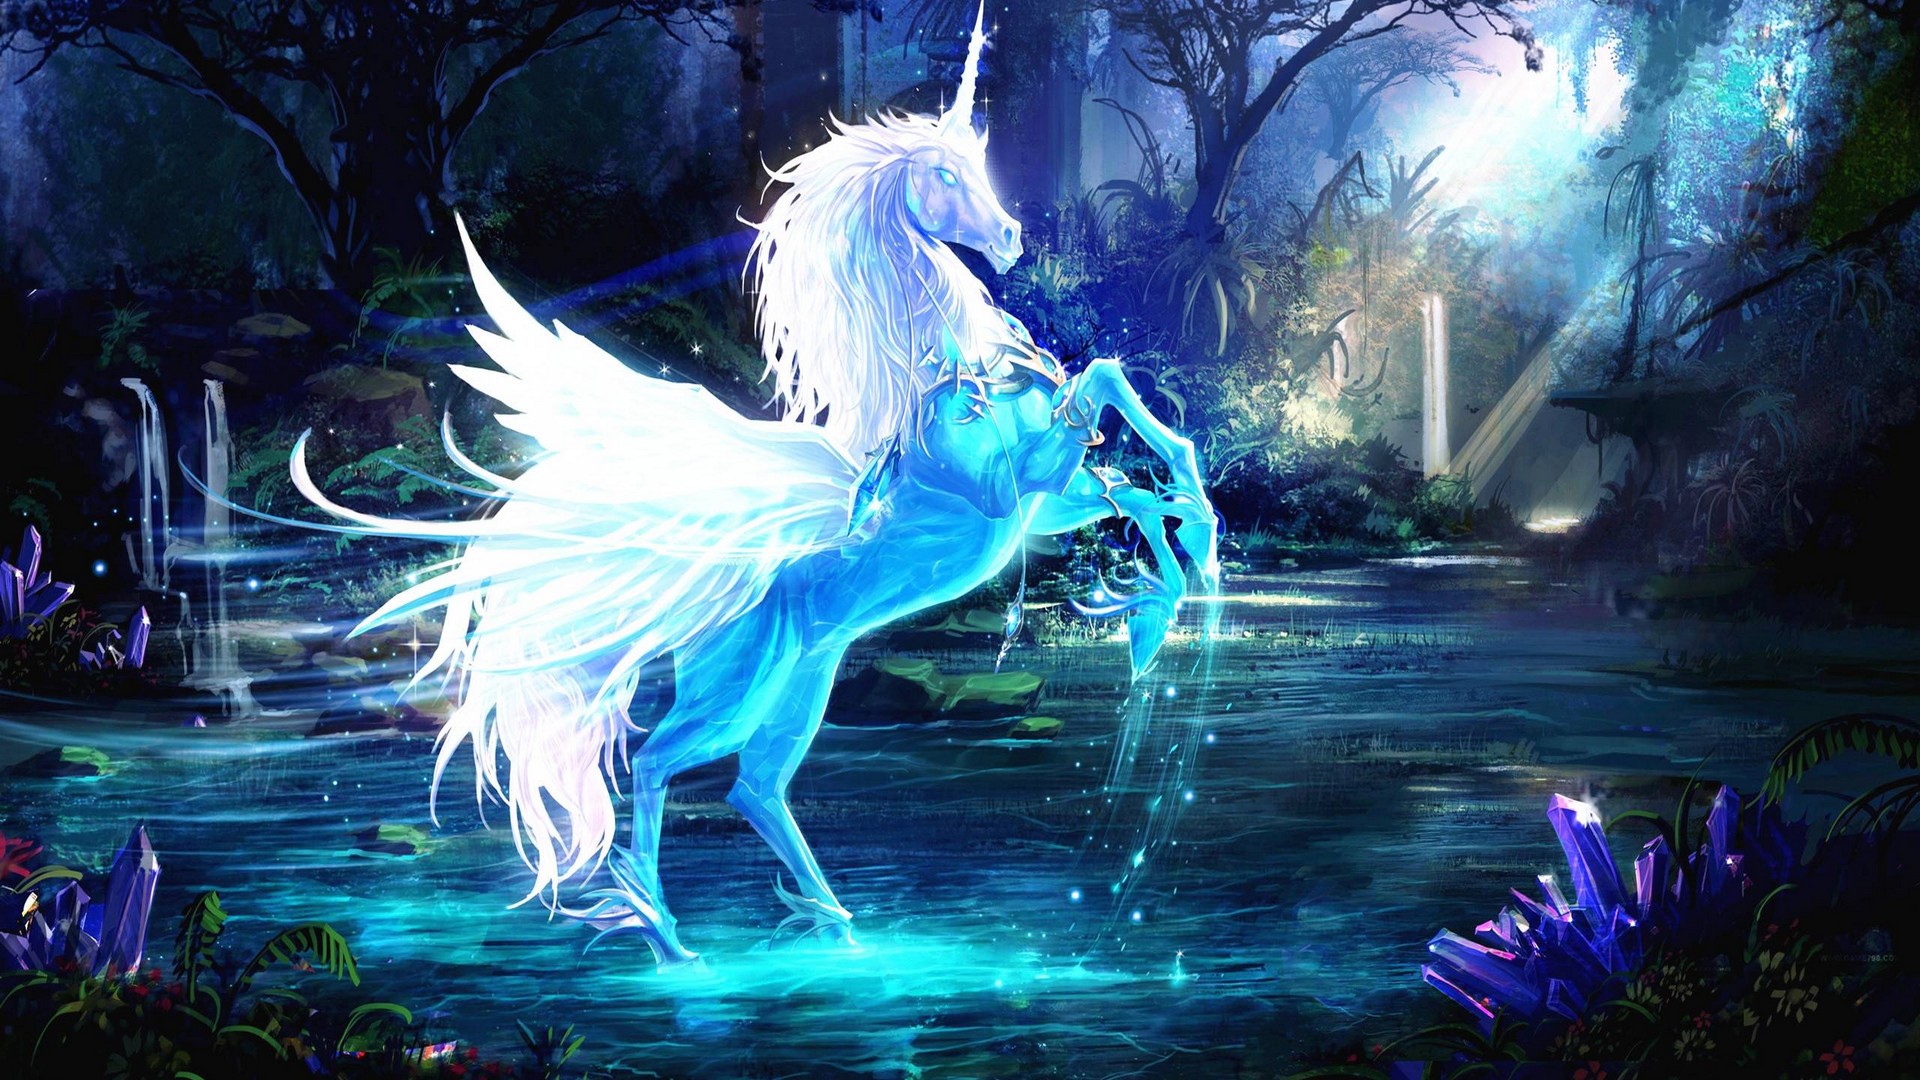 Wallpaper Cute Girly Unicorn with high-resolution 1920x1080 pixel. You can use this wallpaper for your Windows and Mac OS computers as well as your Android and iPhone smartphones